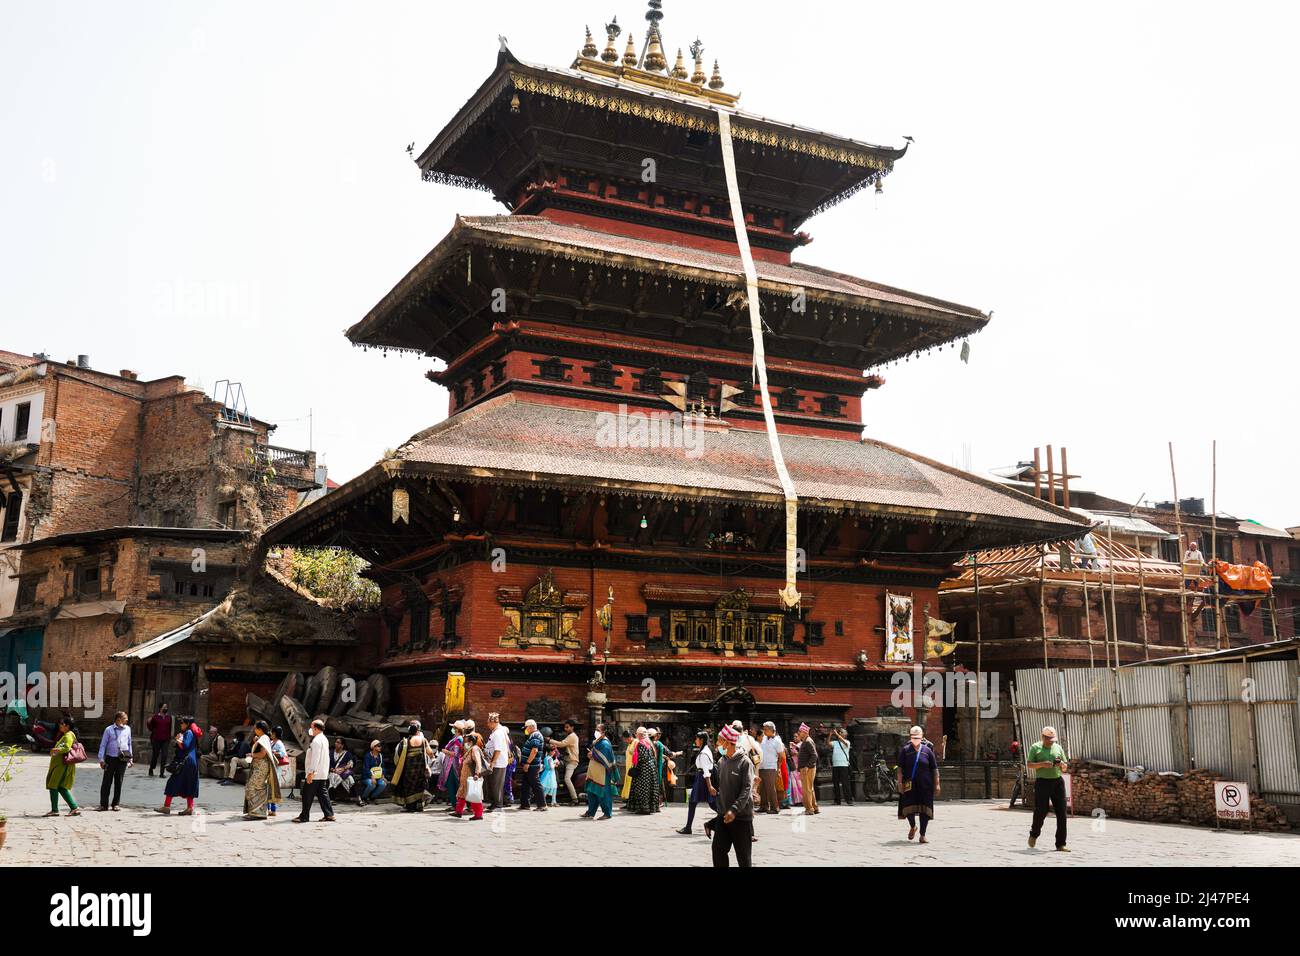 Temples in the temple district of Durbar Square that were destroyed by the earthquake on April 25, 2015 are being restored, Kathmandu, Nepal    ---   Durch das Erdbeben am 25.4.2015 zerstörte Tempel im Tempelbezirk Durbar Square werden reatauriert, Kathmandu, Nepal Stock Photo